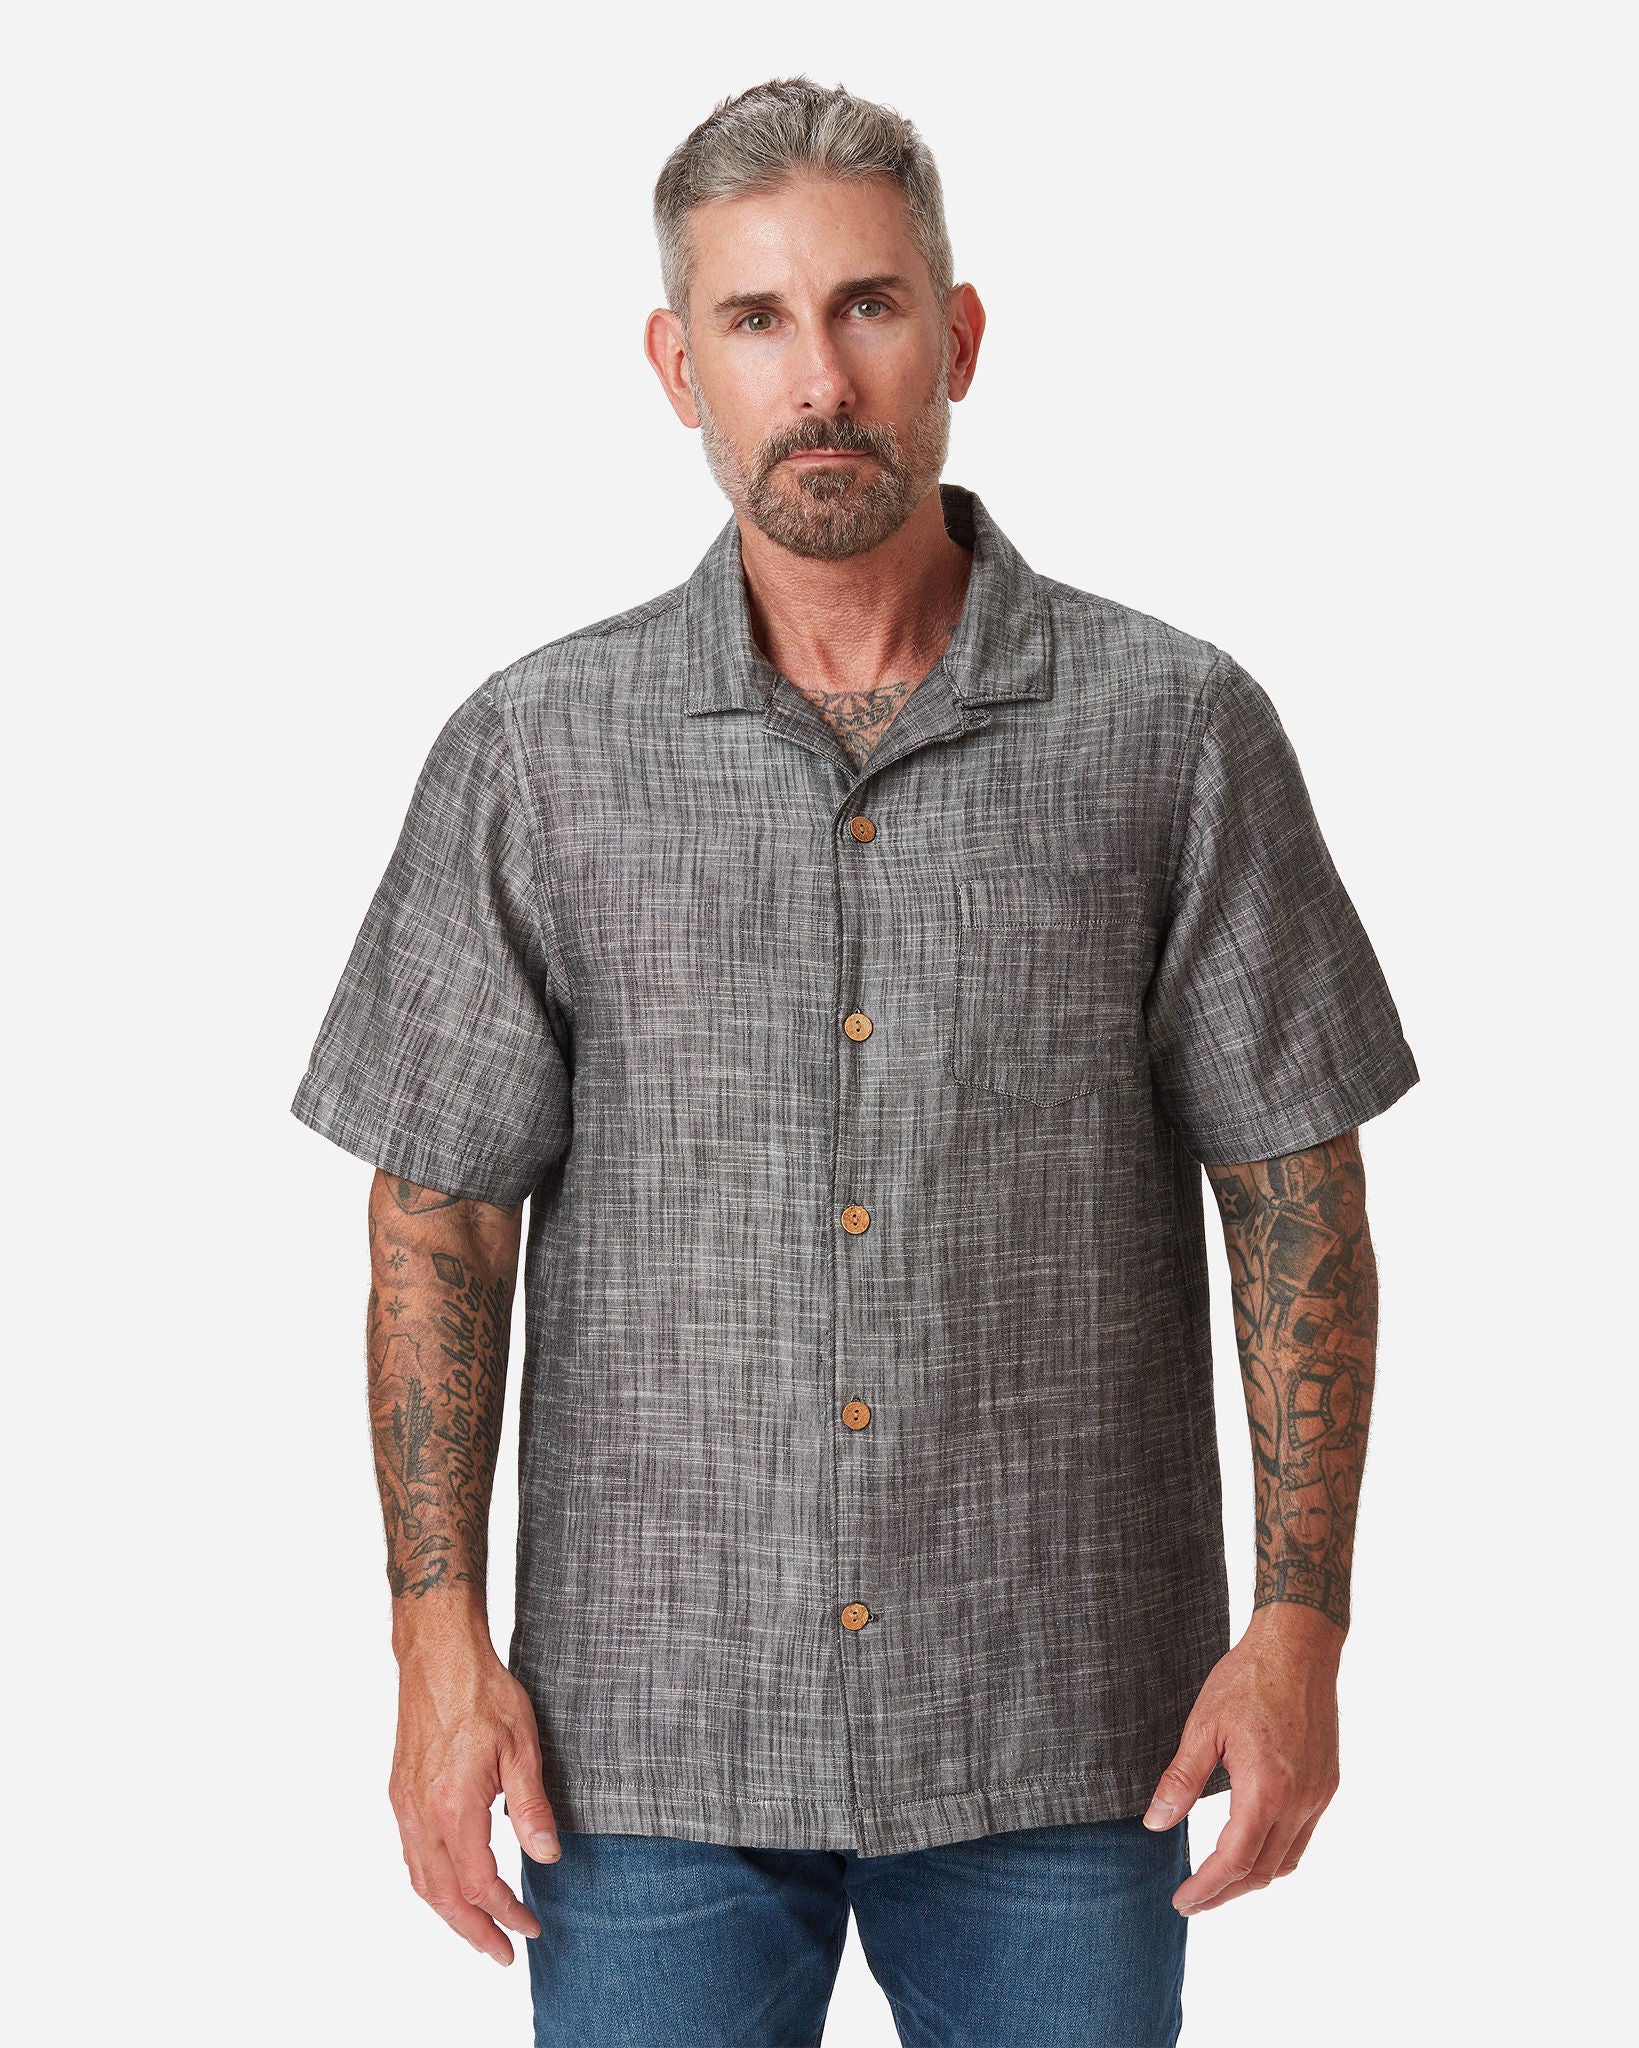 Model with directly frontward posture Ace Rivington "Black" Double gauze soft-textured cotton fabric camp collar shirt with coconut buttons and left-breast pocket and a pair of Ace Rivington dark vintage blue denim jeans